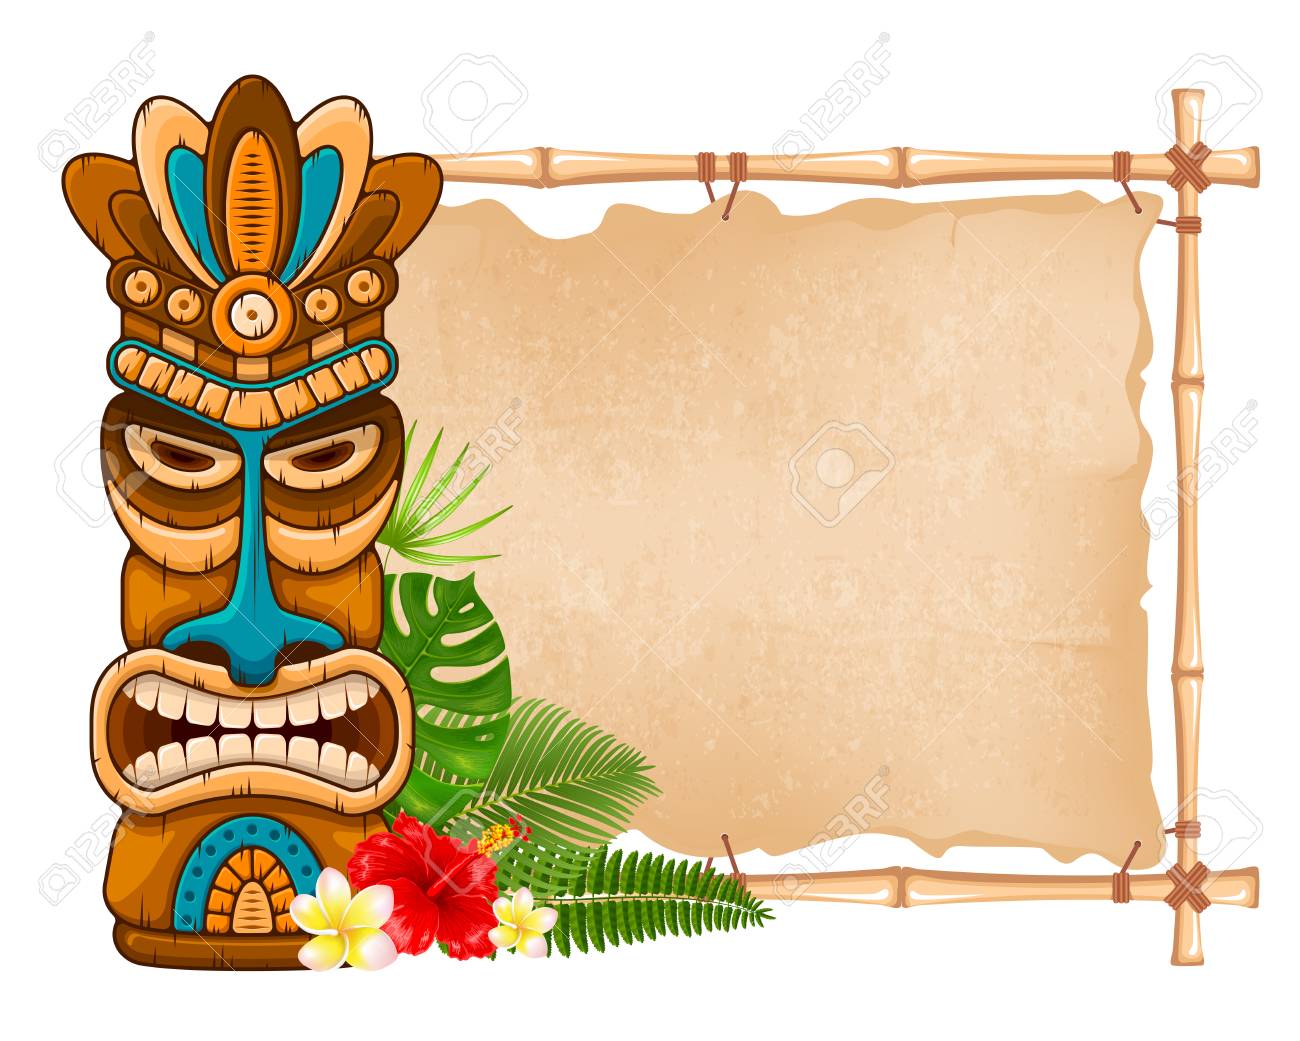 Tiki Tribal Wooden Mask Tropical Exotic Plants And Bamboo